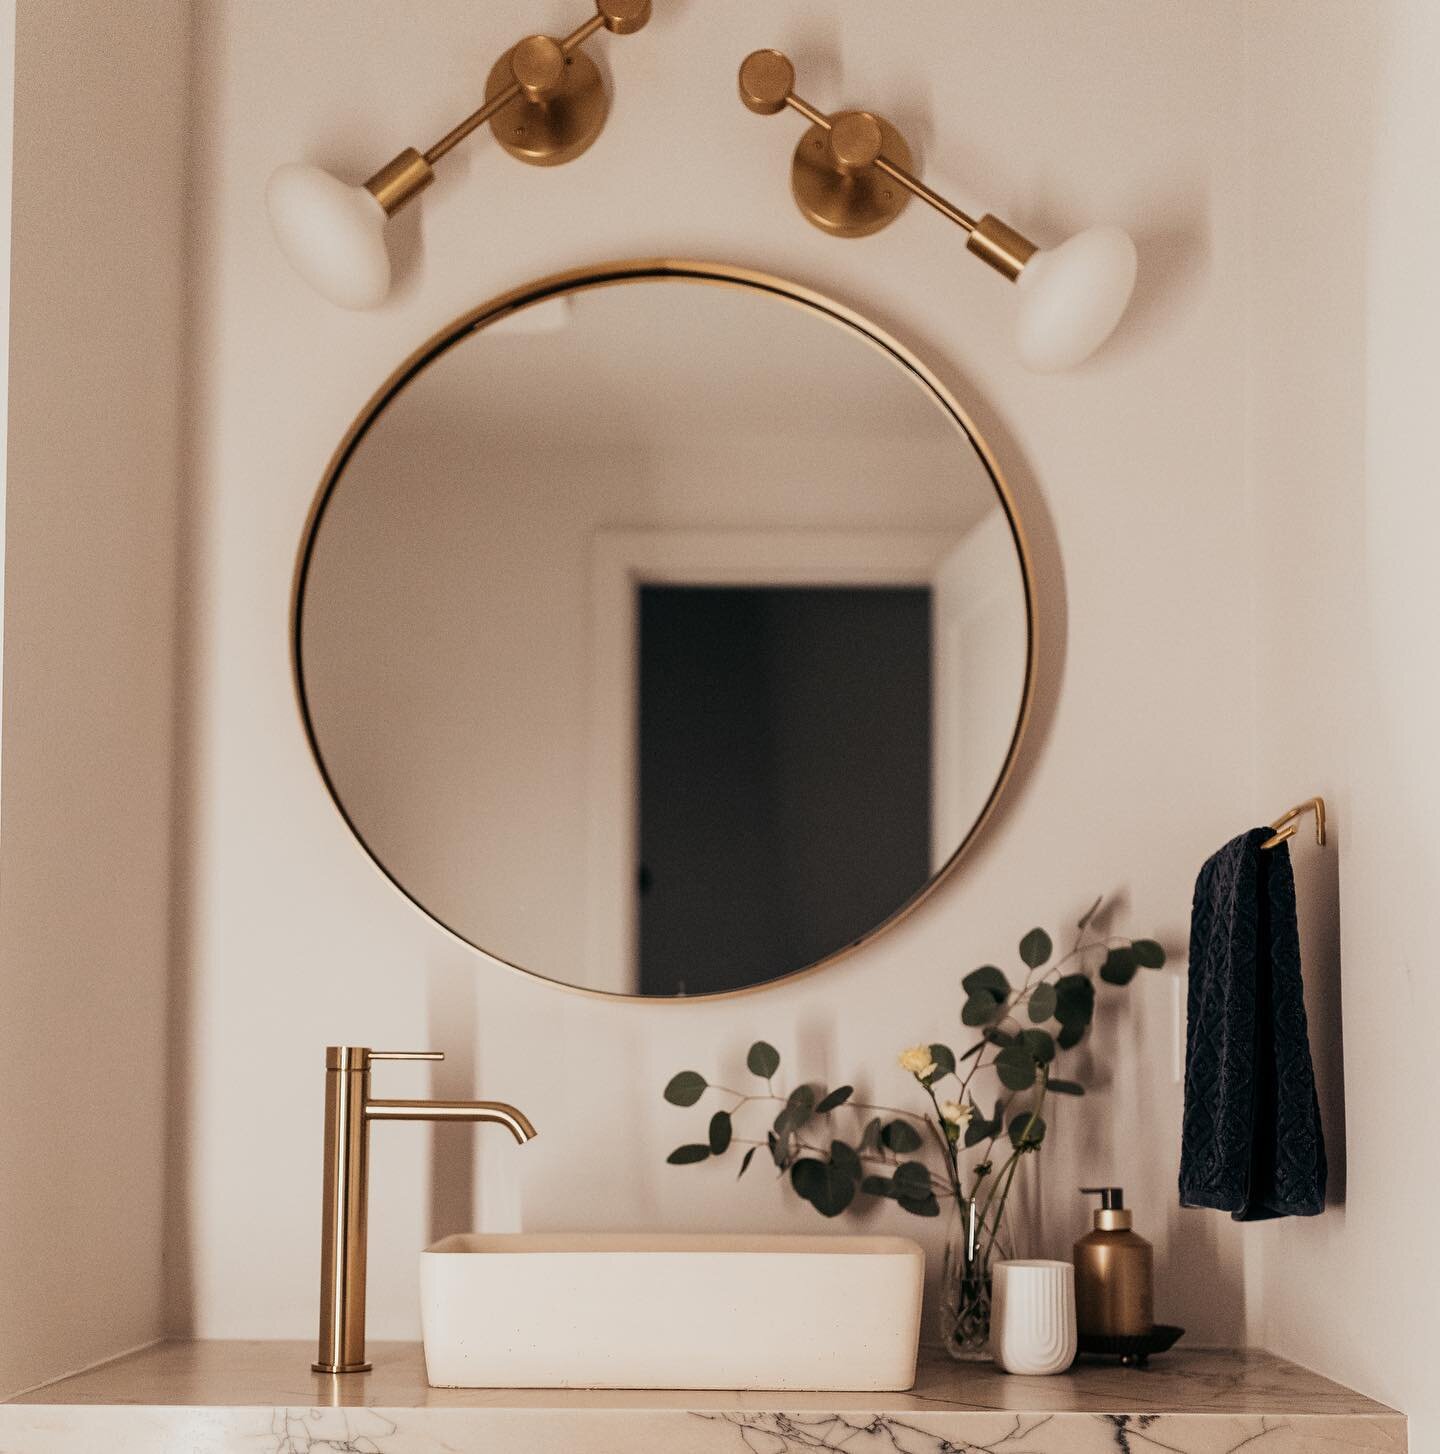 All the right details in this petite powder room.